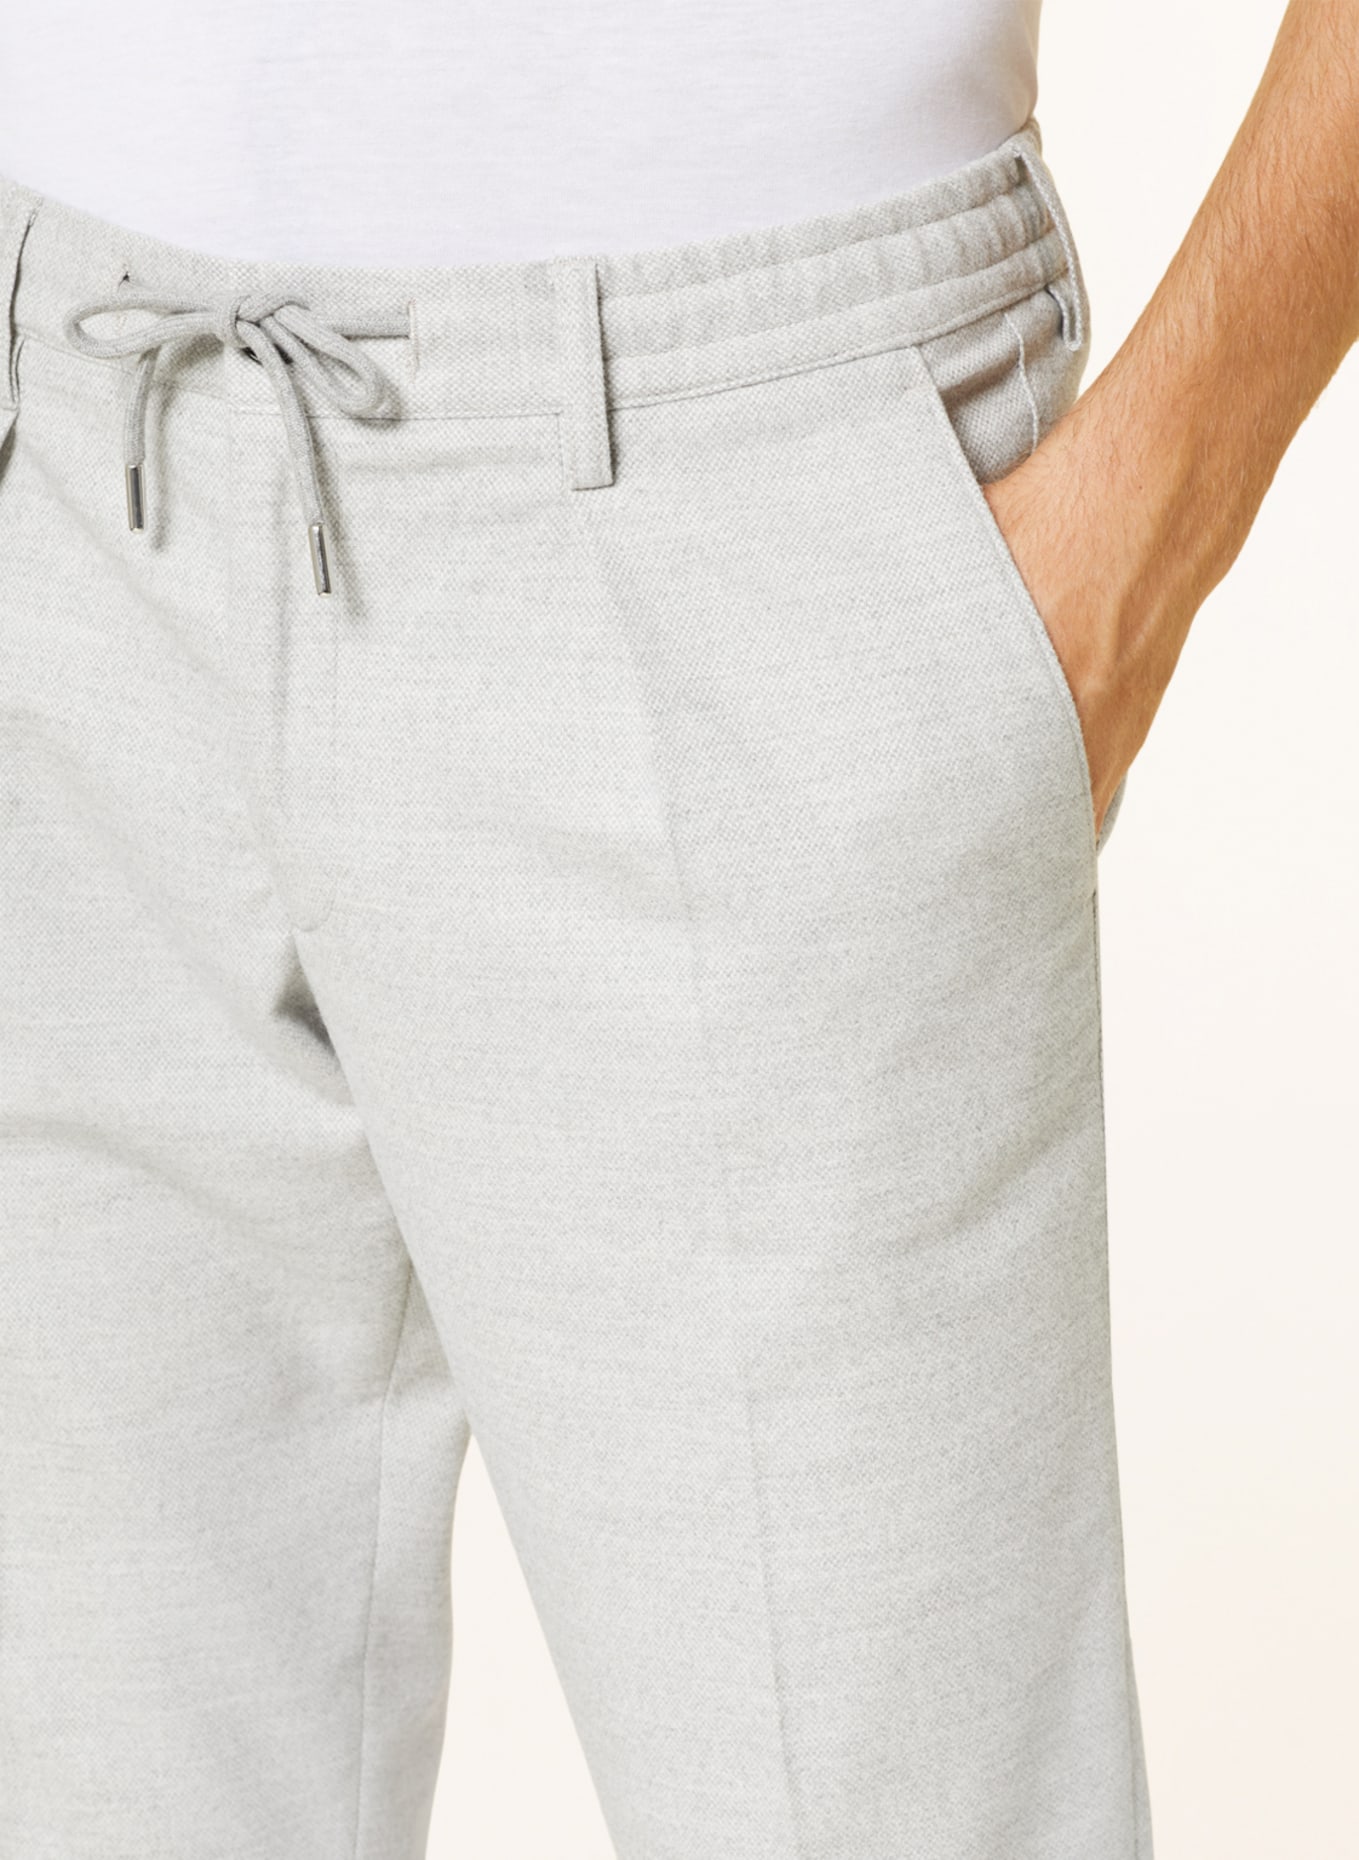 PROFUOMO Pants in jogger style, Color: LIGHT GRAY (Image 6)